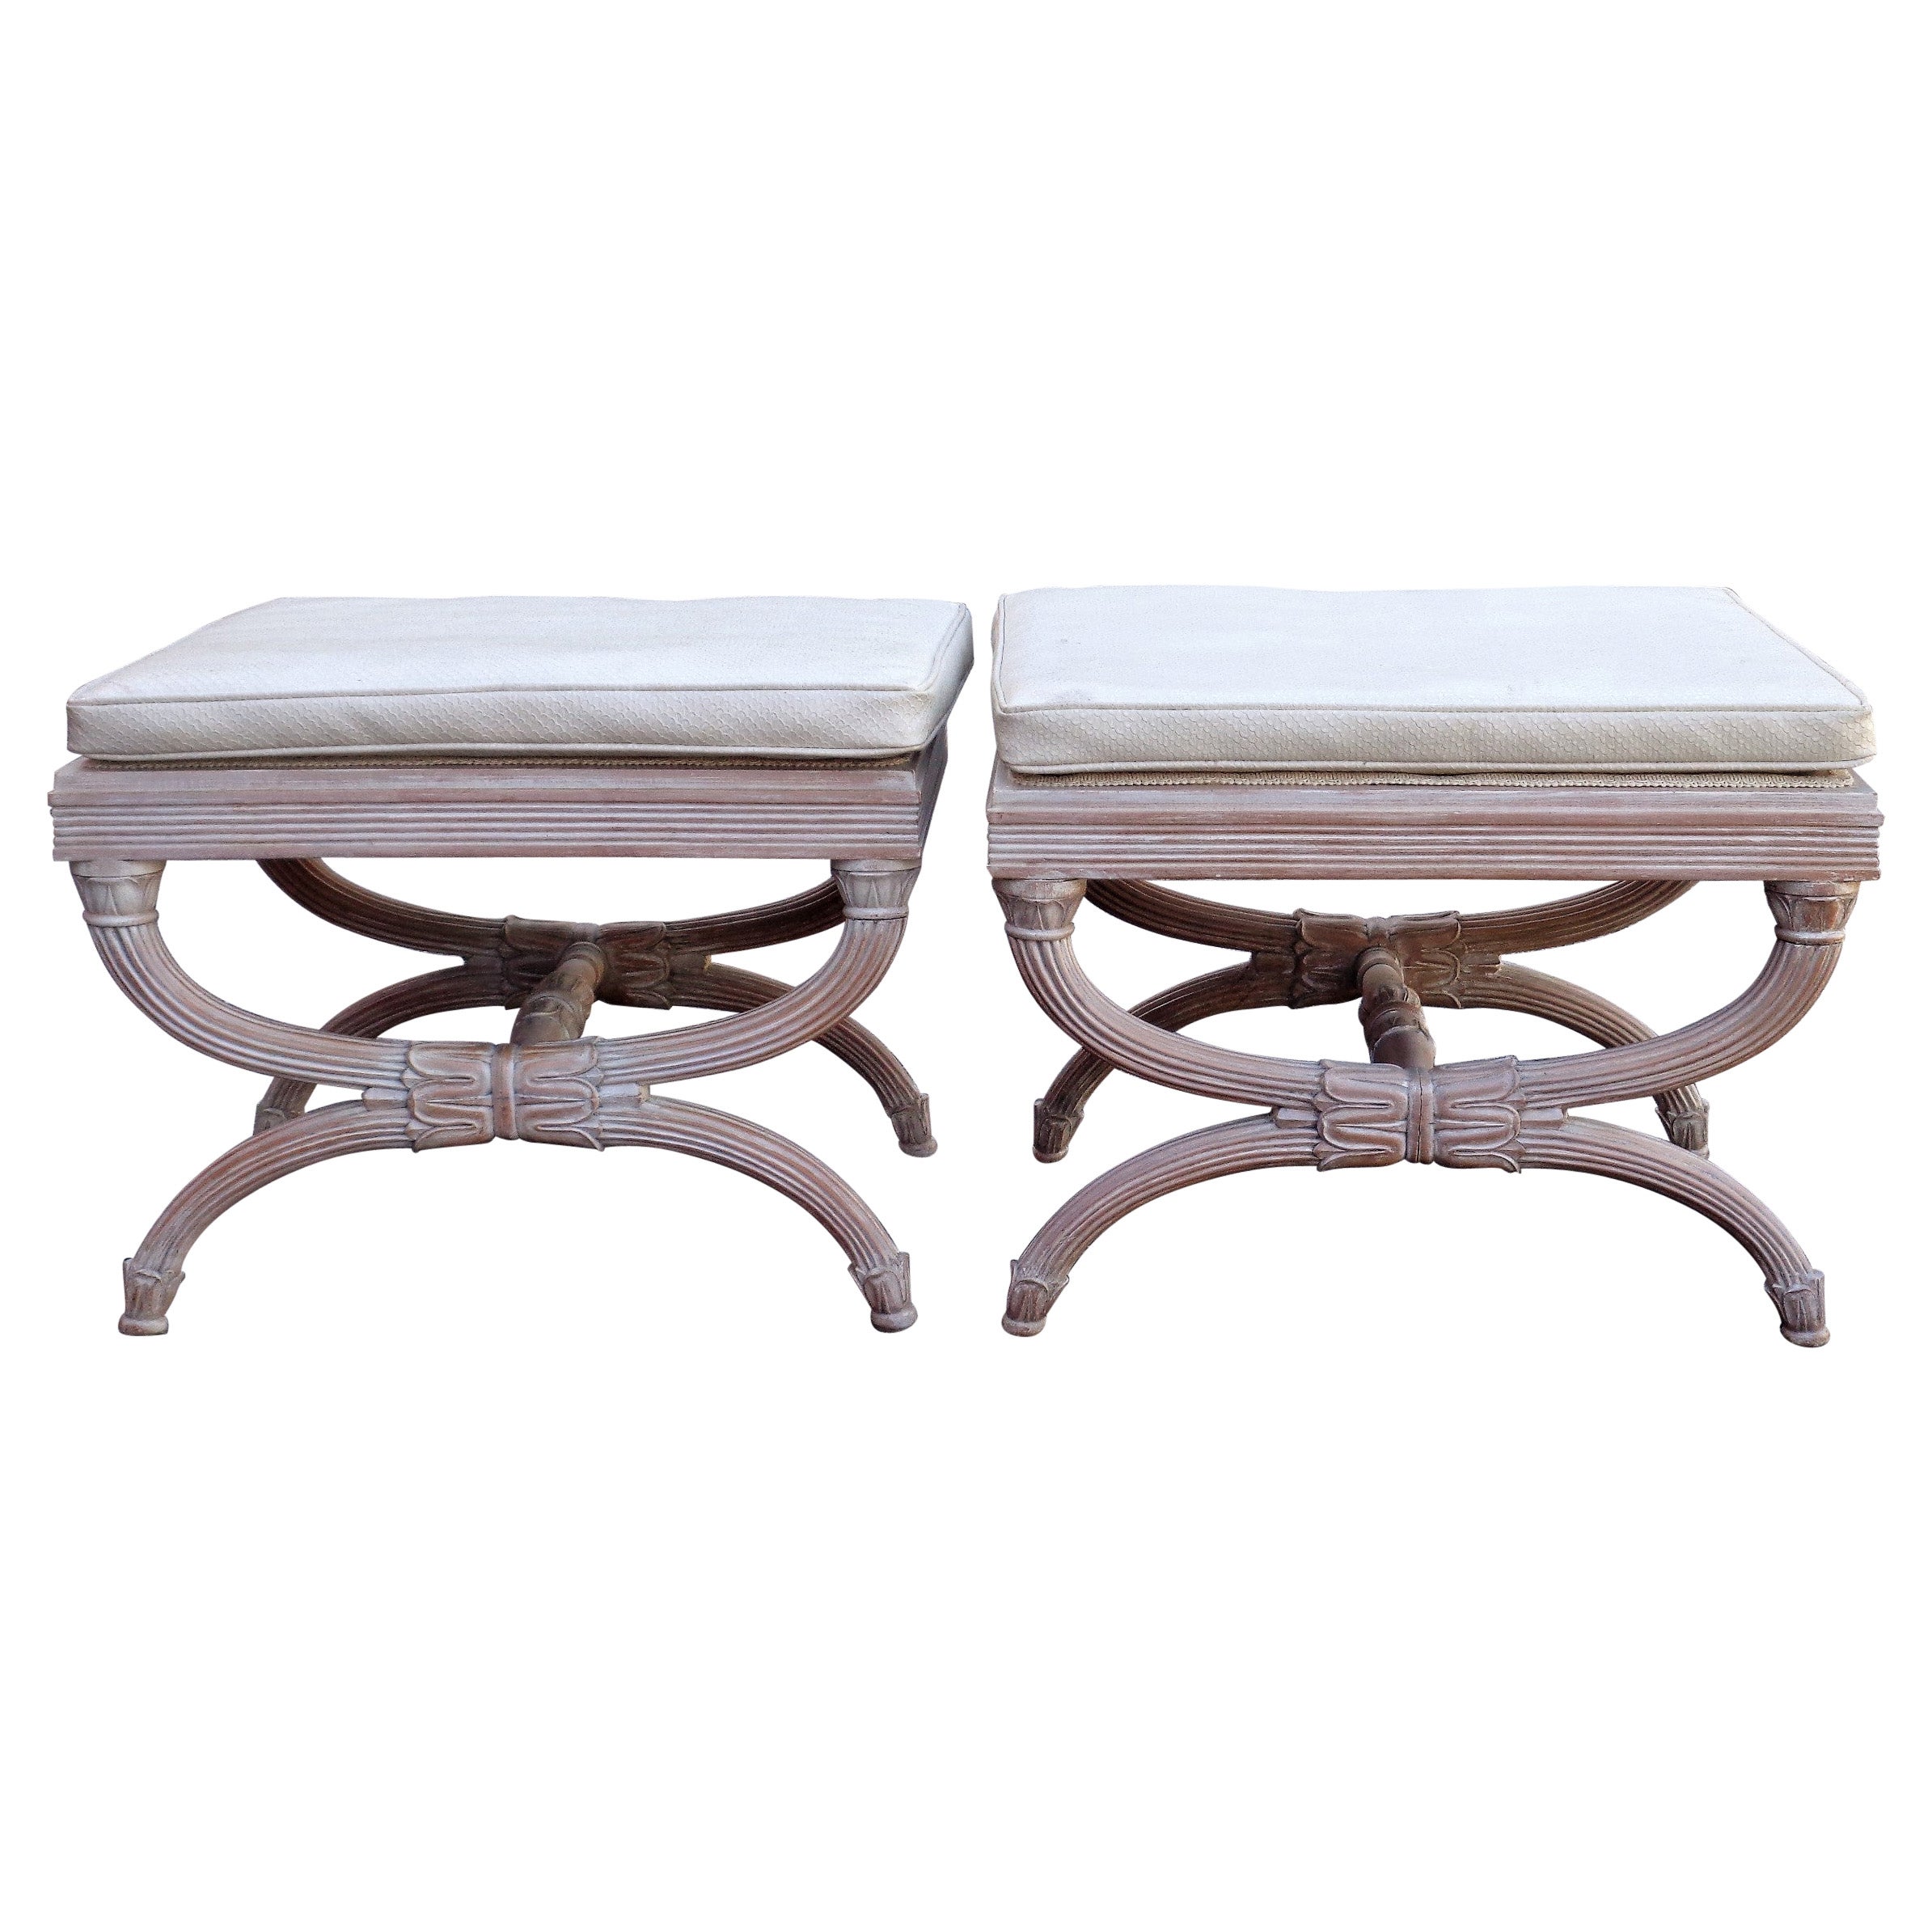 Italian Neoclassical Style Cerused Curule Benches Stools